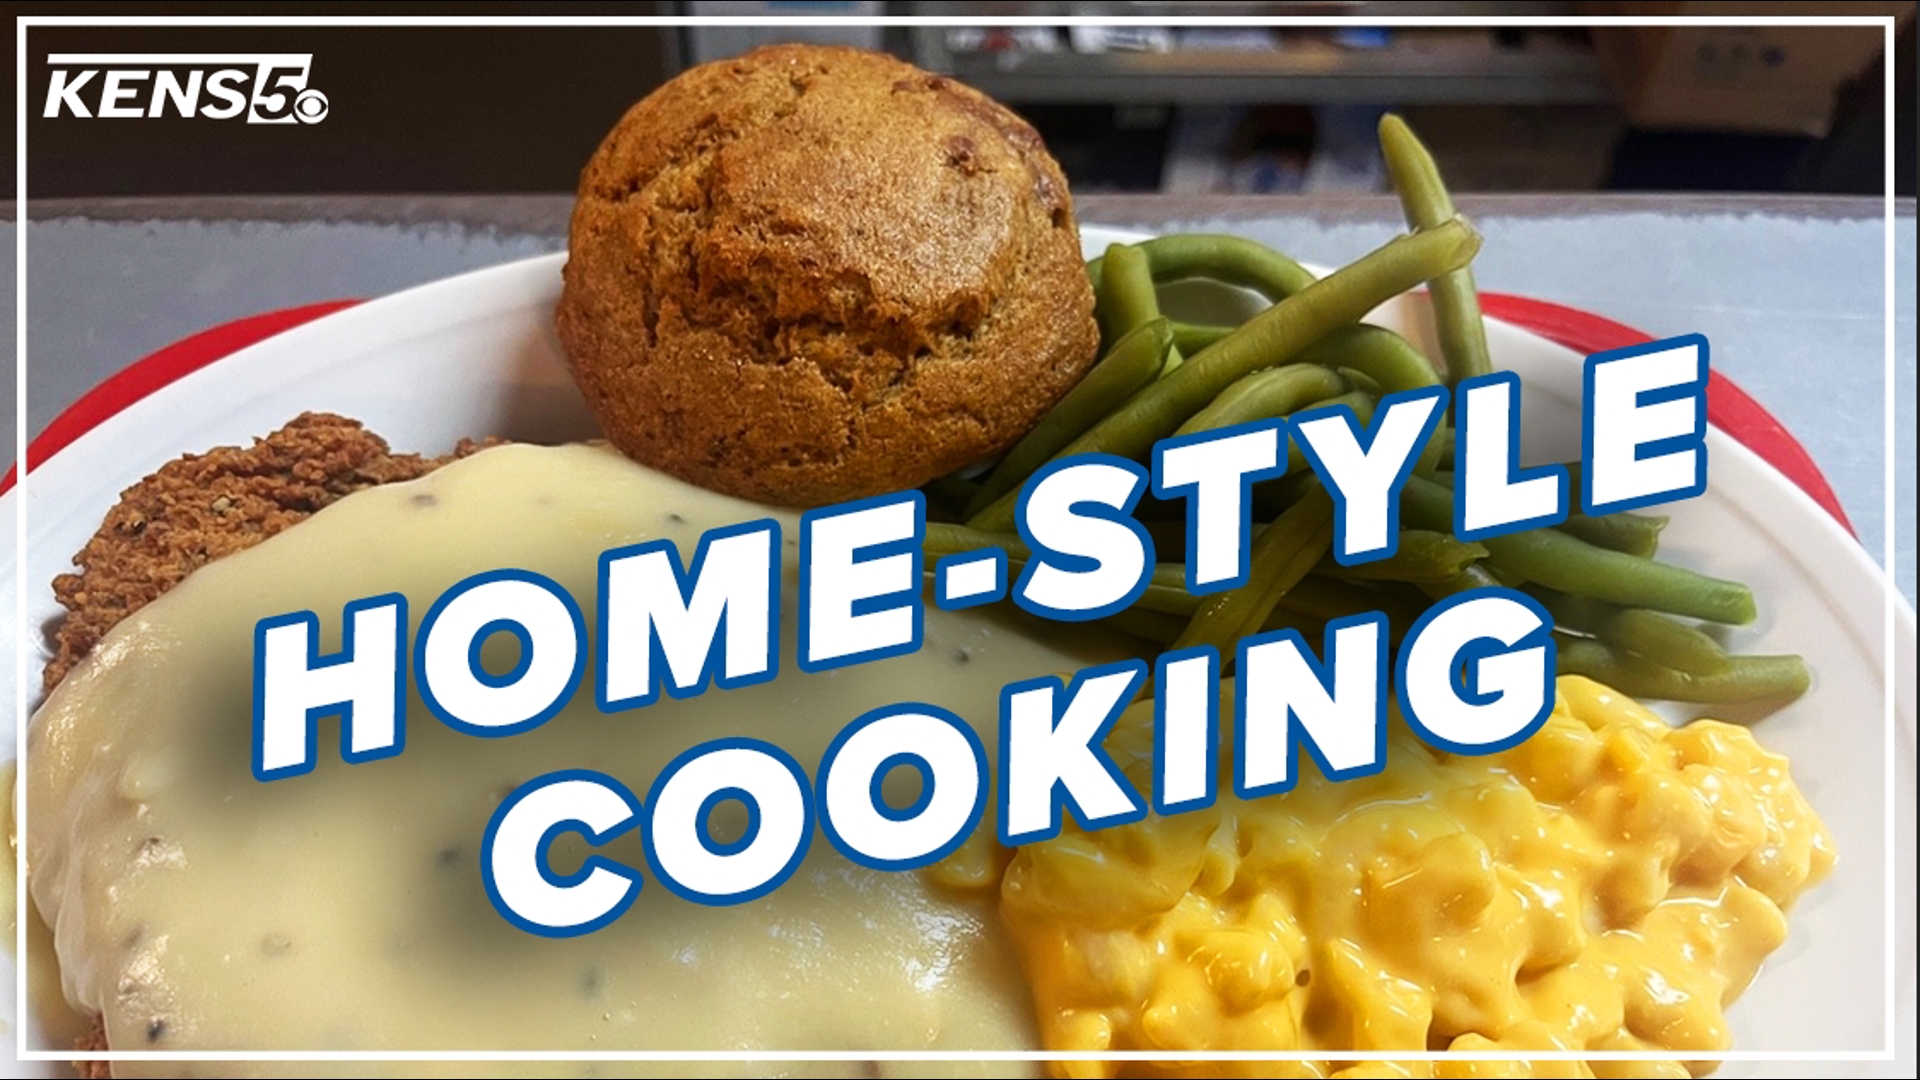 We went on a mission to find some of the best Texas Hill Country home cooking you'll ever taste!